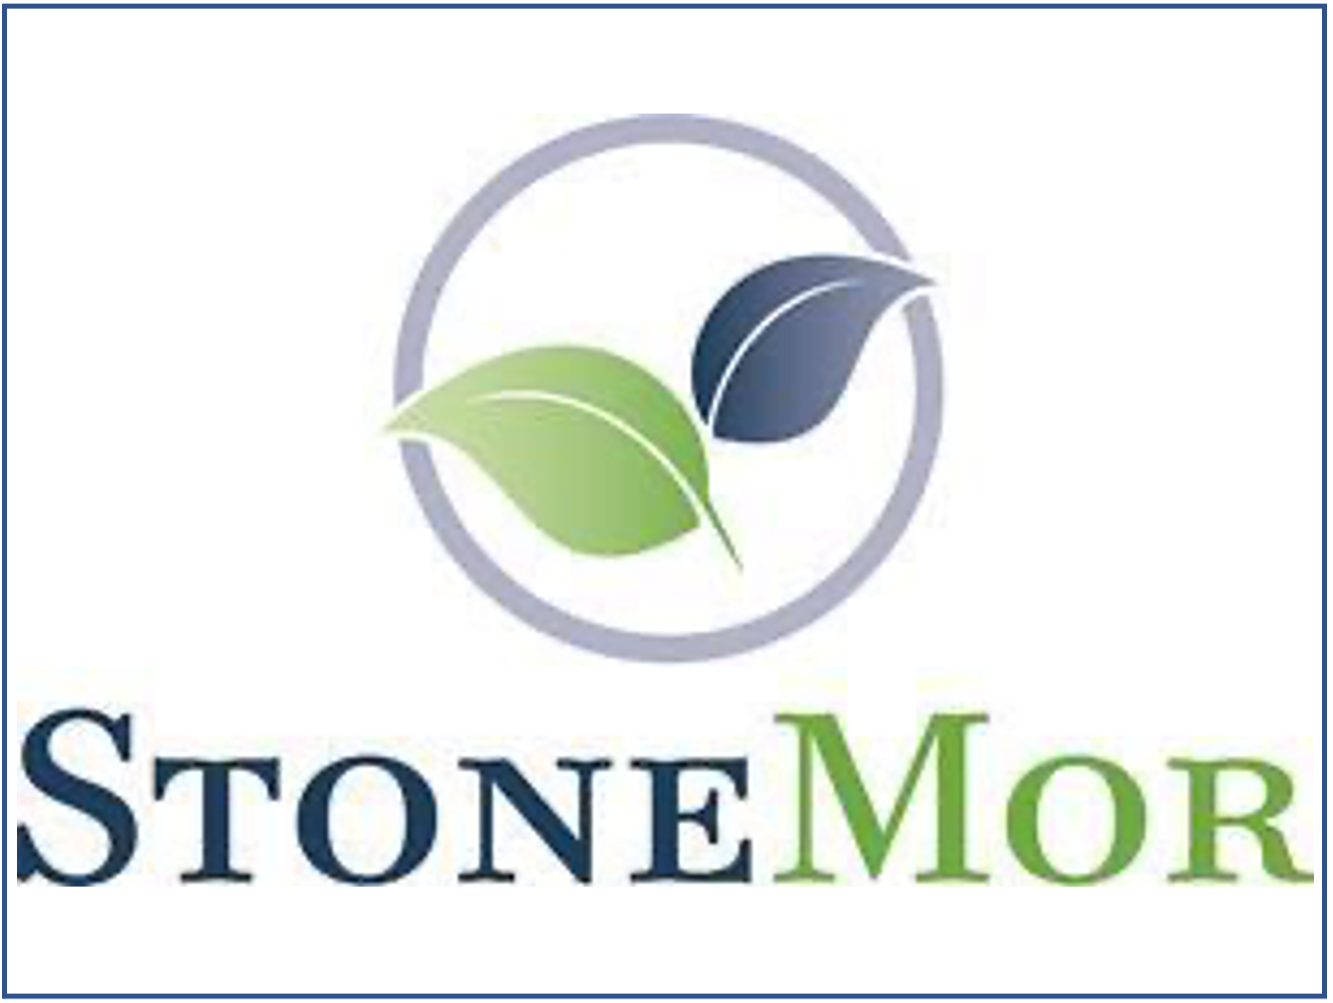 StoneMor Inc. Enters into Agreement to be Acquired by Axar Capital Management, LP